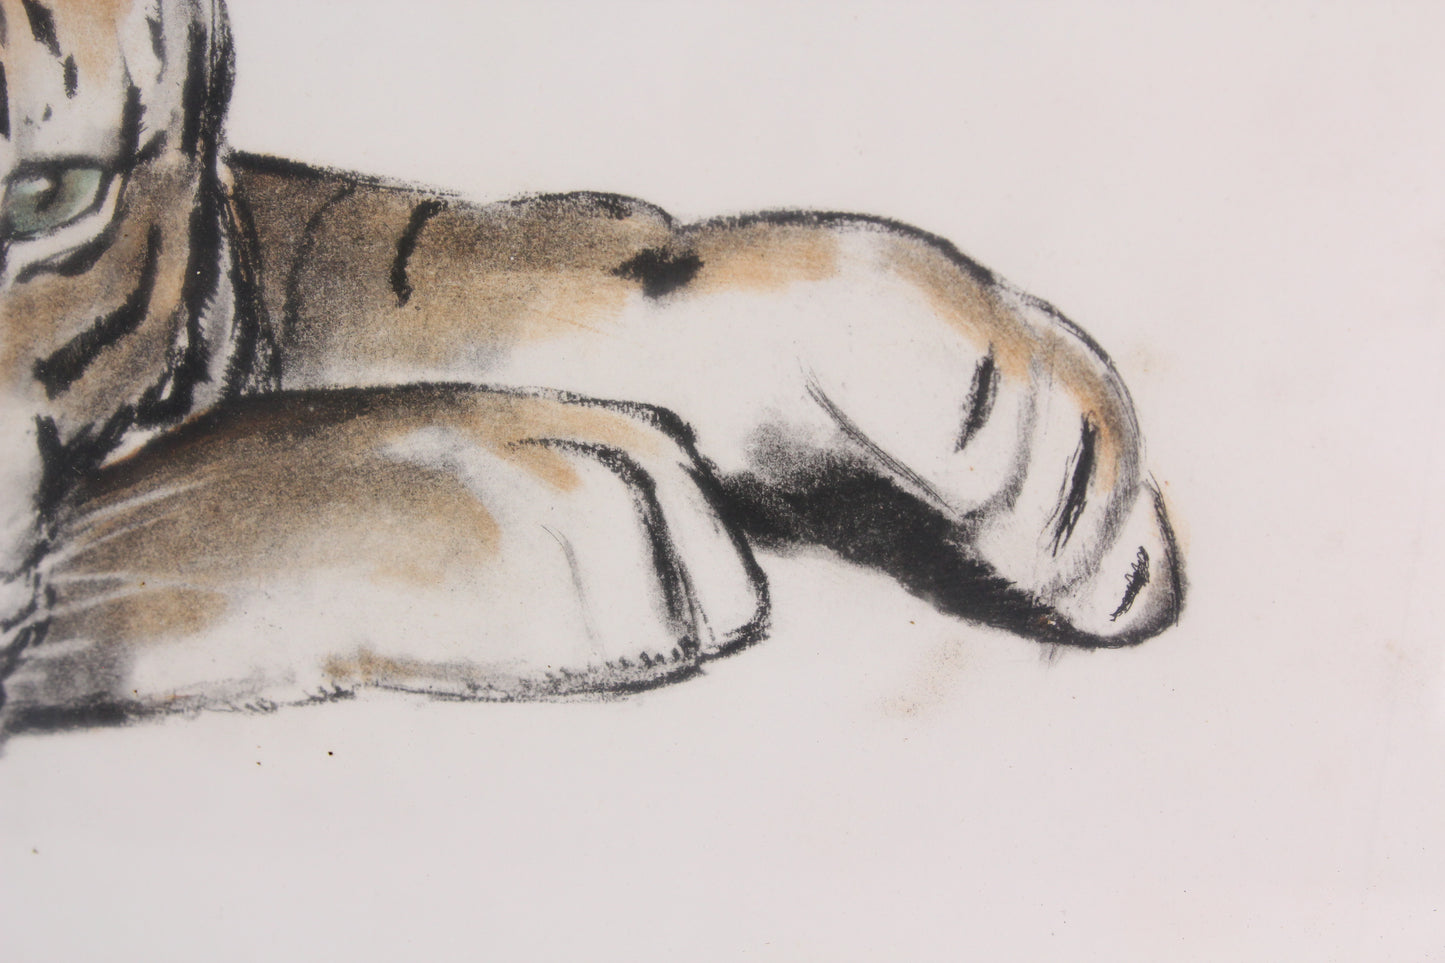 Jean-Camille Cipra Signed Resting Tiger Genuine French Etching - 31 x 21.5"